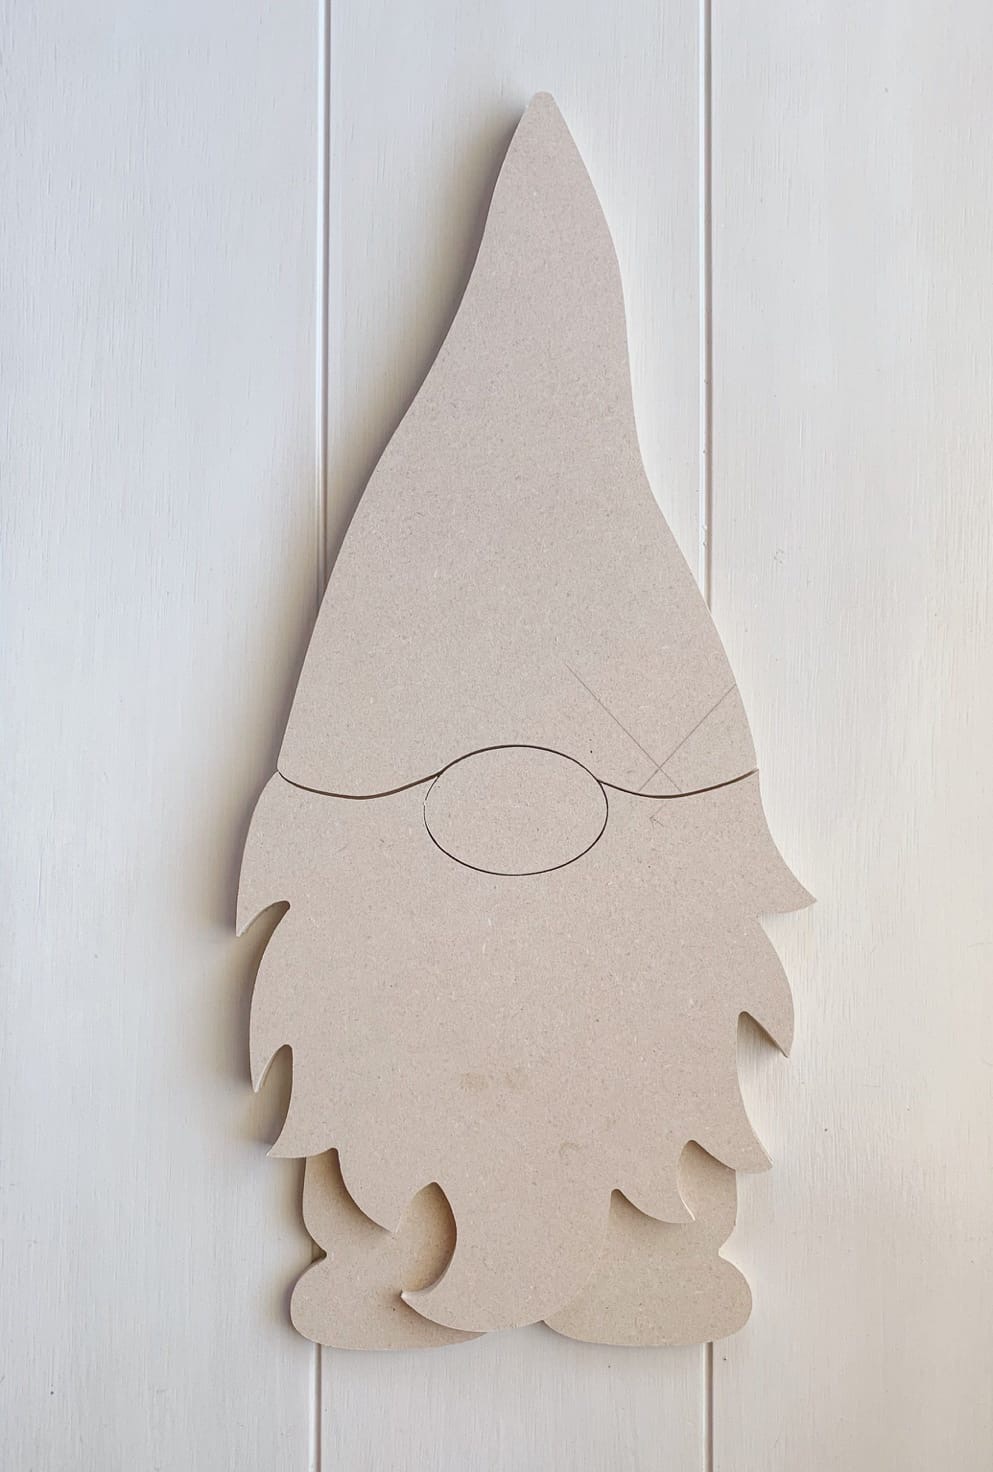 CNC Laser Cut Christmas Gnome Ornament Free CDR File